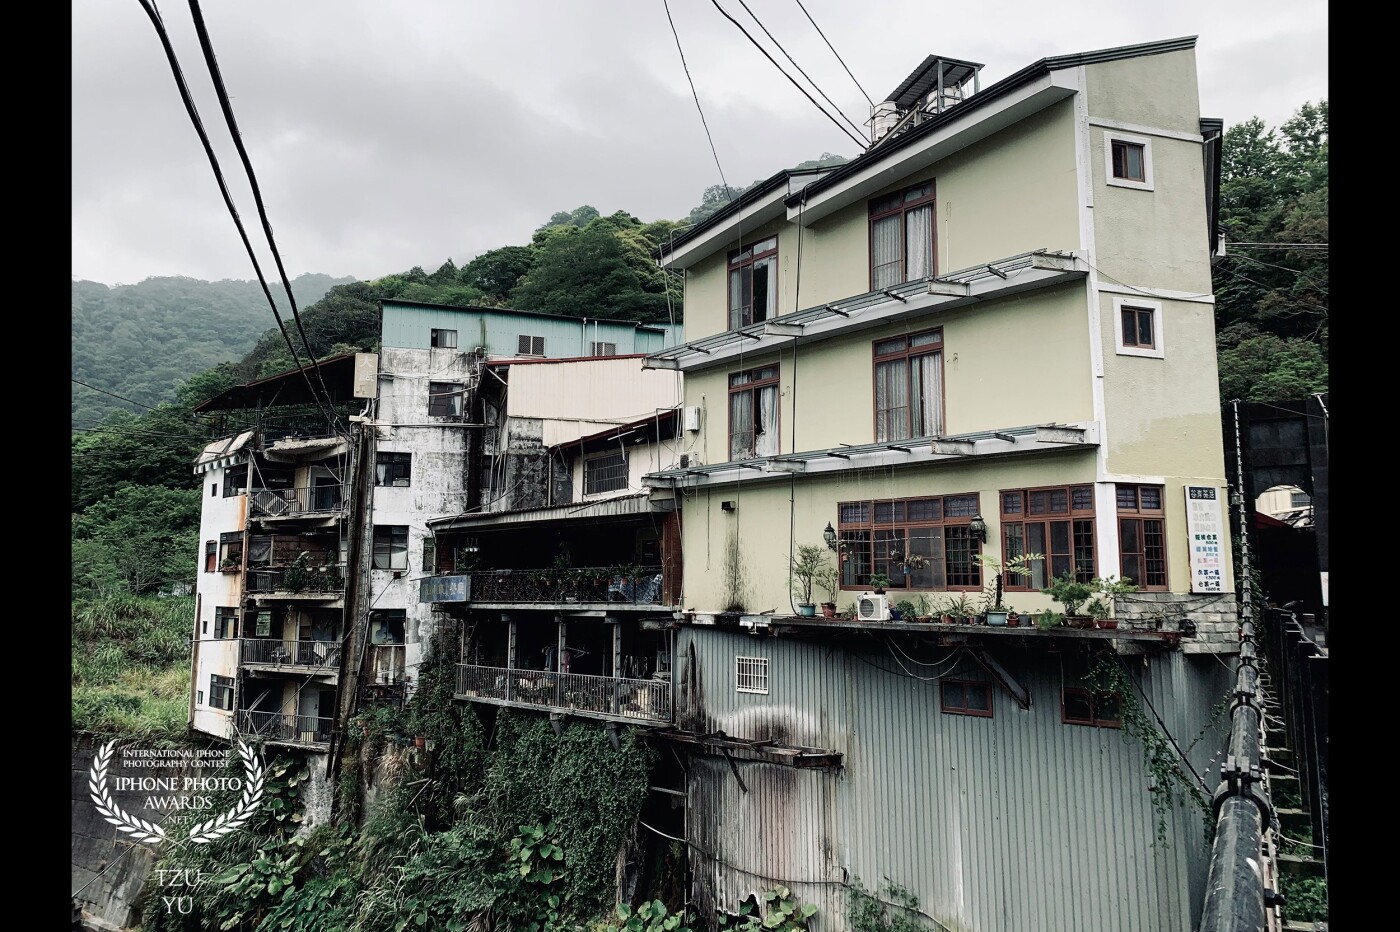 There is a hot spring township in central Taiwan, where houses were damaged due to a typhoon in a certain year. Before the development of tourism was popular here, now there are only small dilapidated and sparsely populated villages